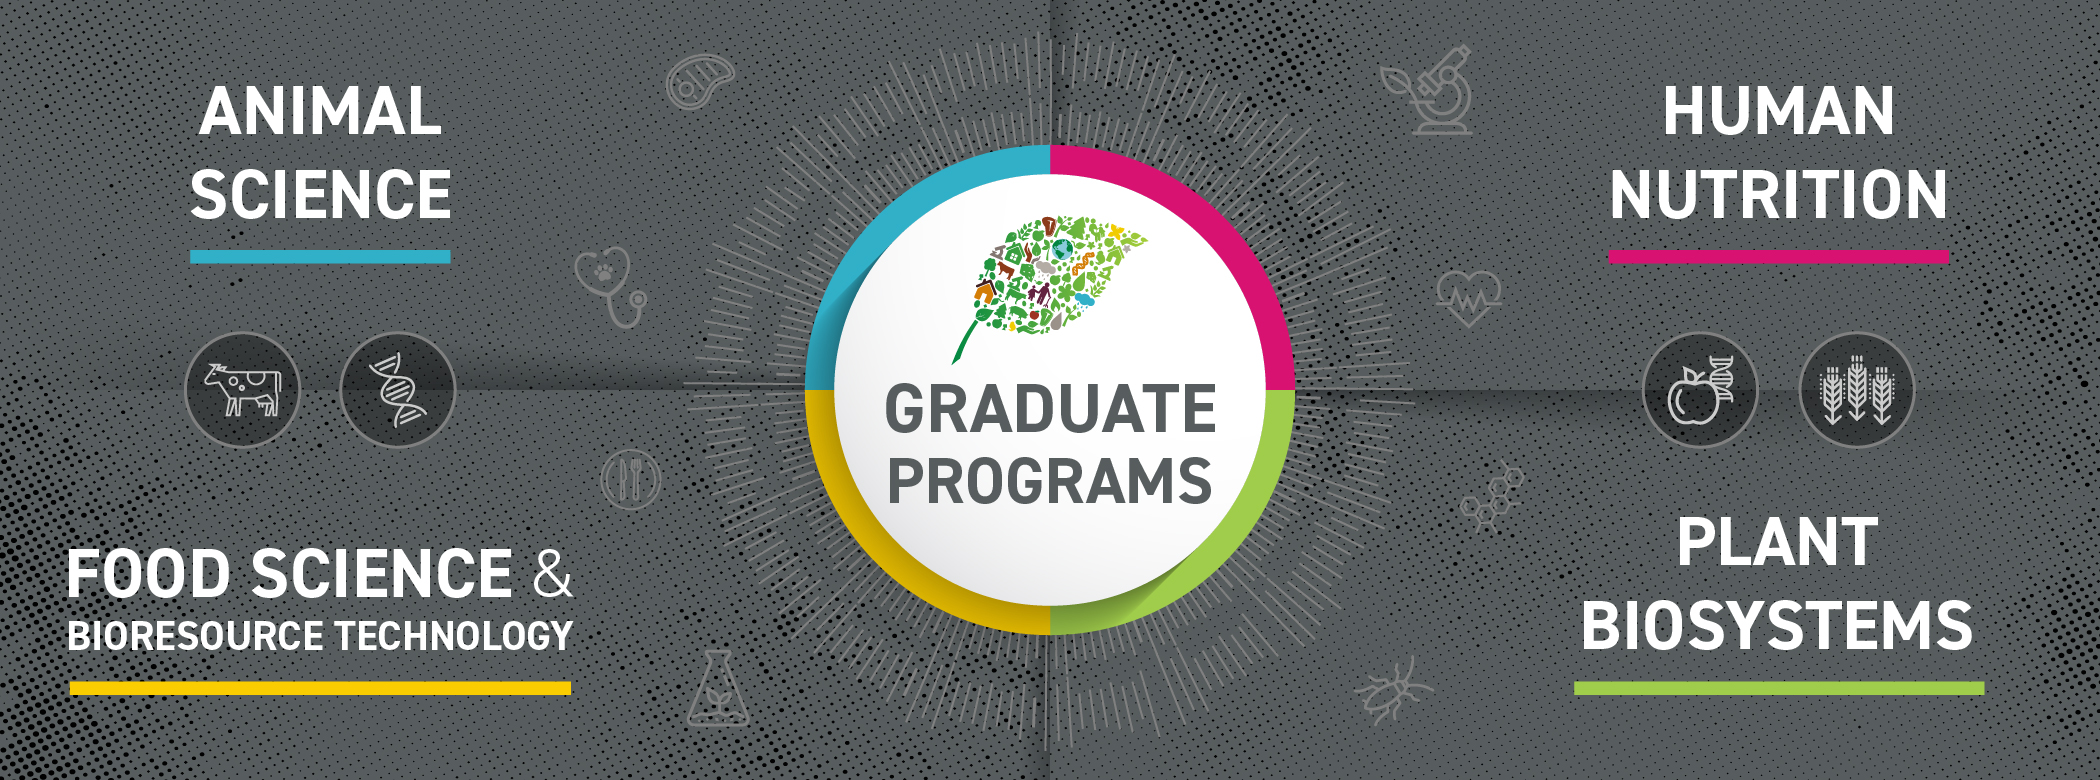 Agricultural Food & Nutritional Science Graduate Programs | Faculty of  Agricultural, Life & Environmental Sciences